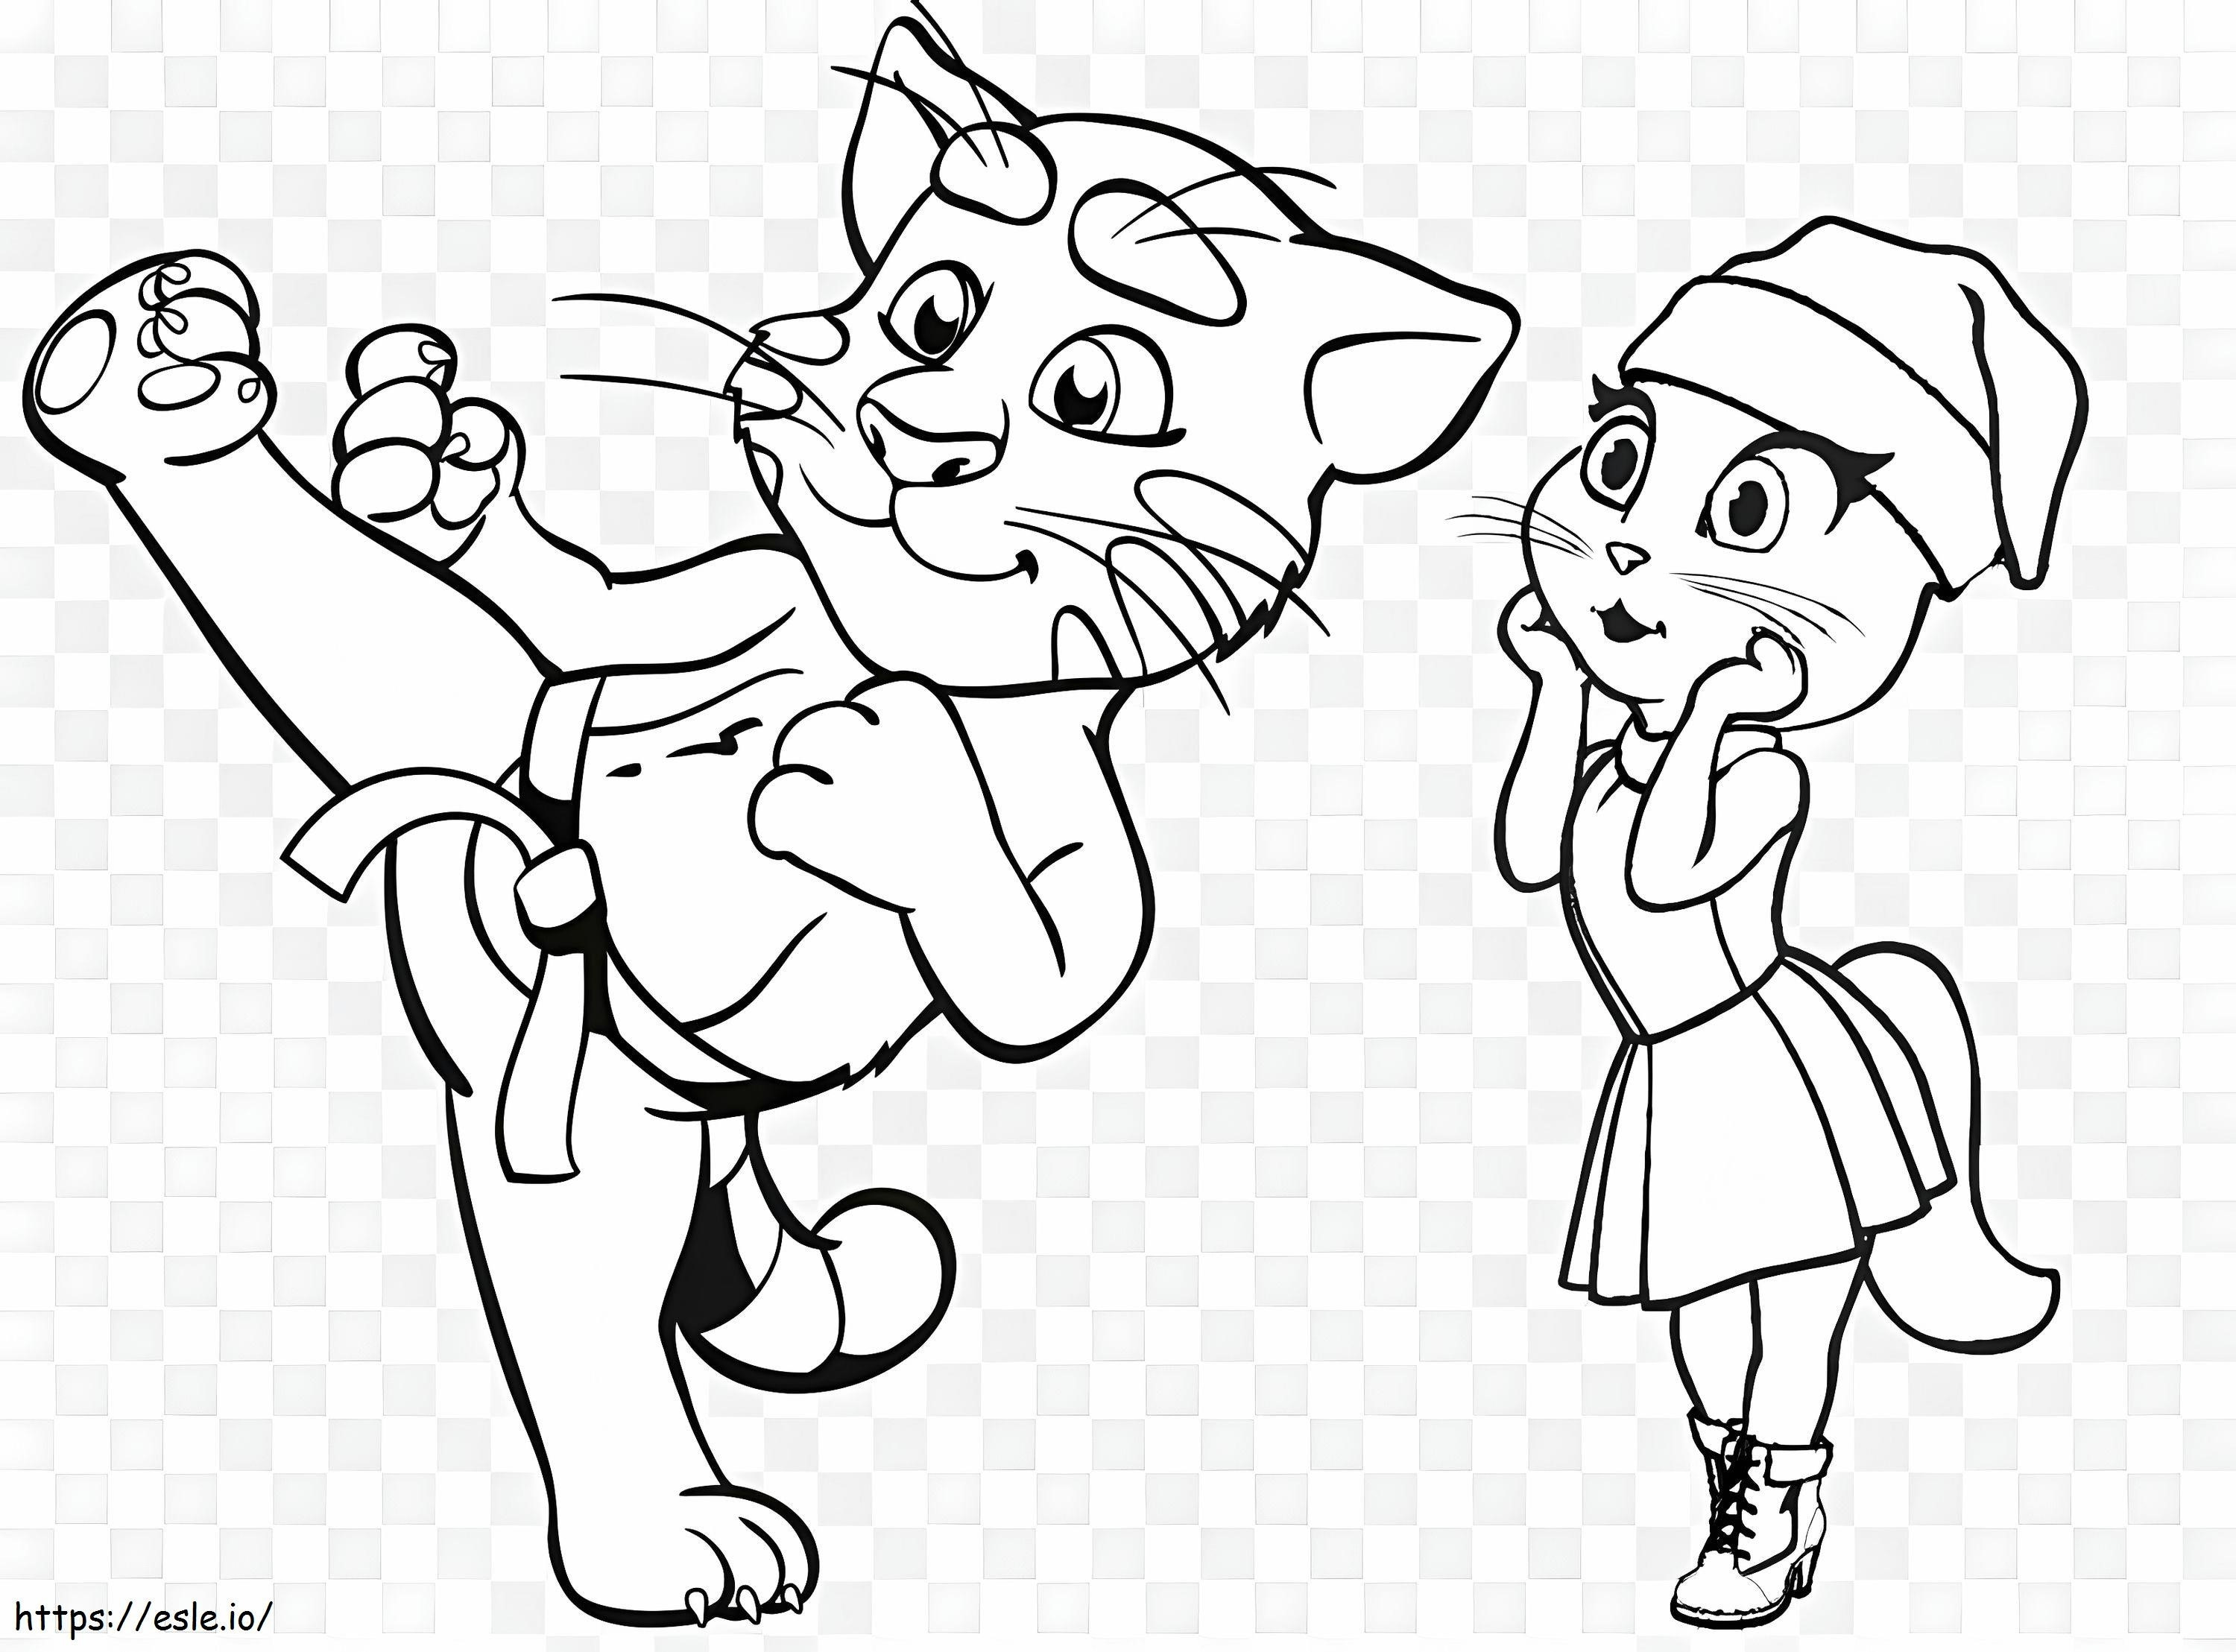 Talking Tom And Angela 2 coloring page